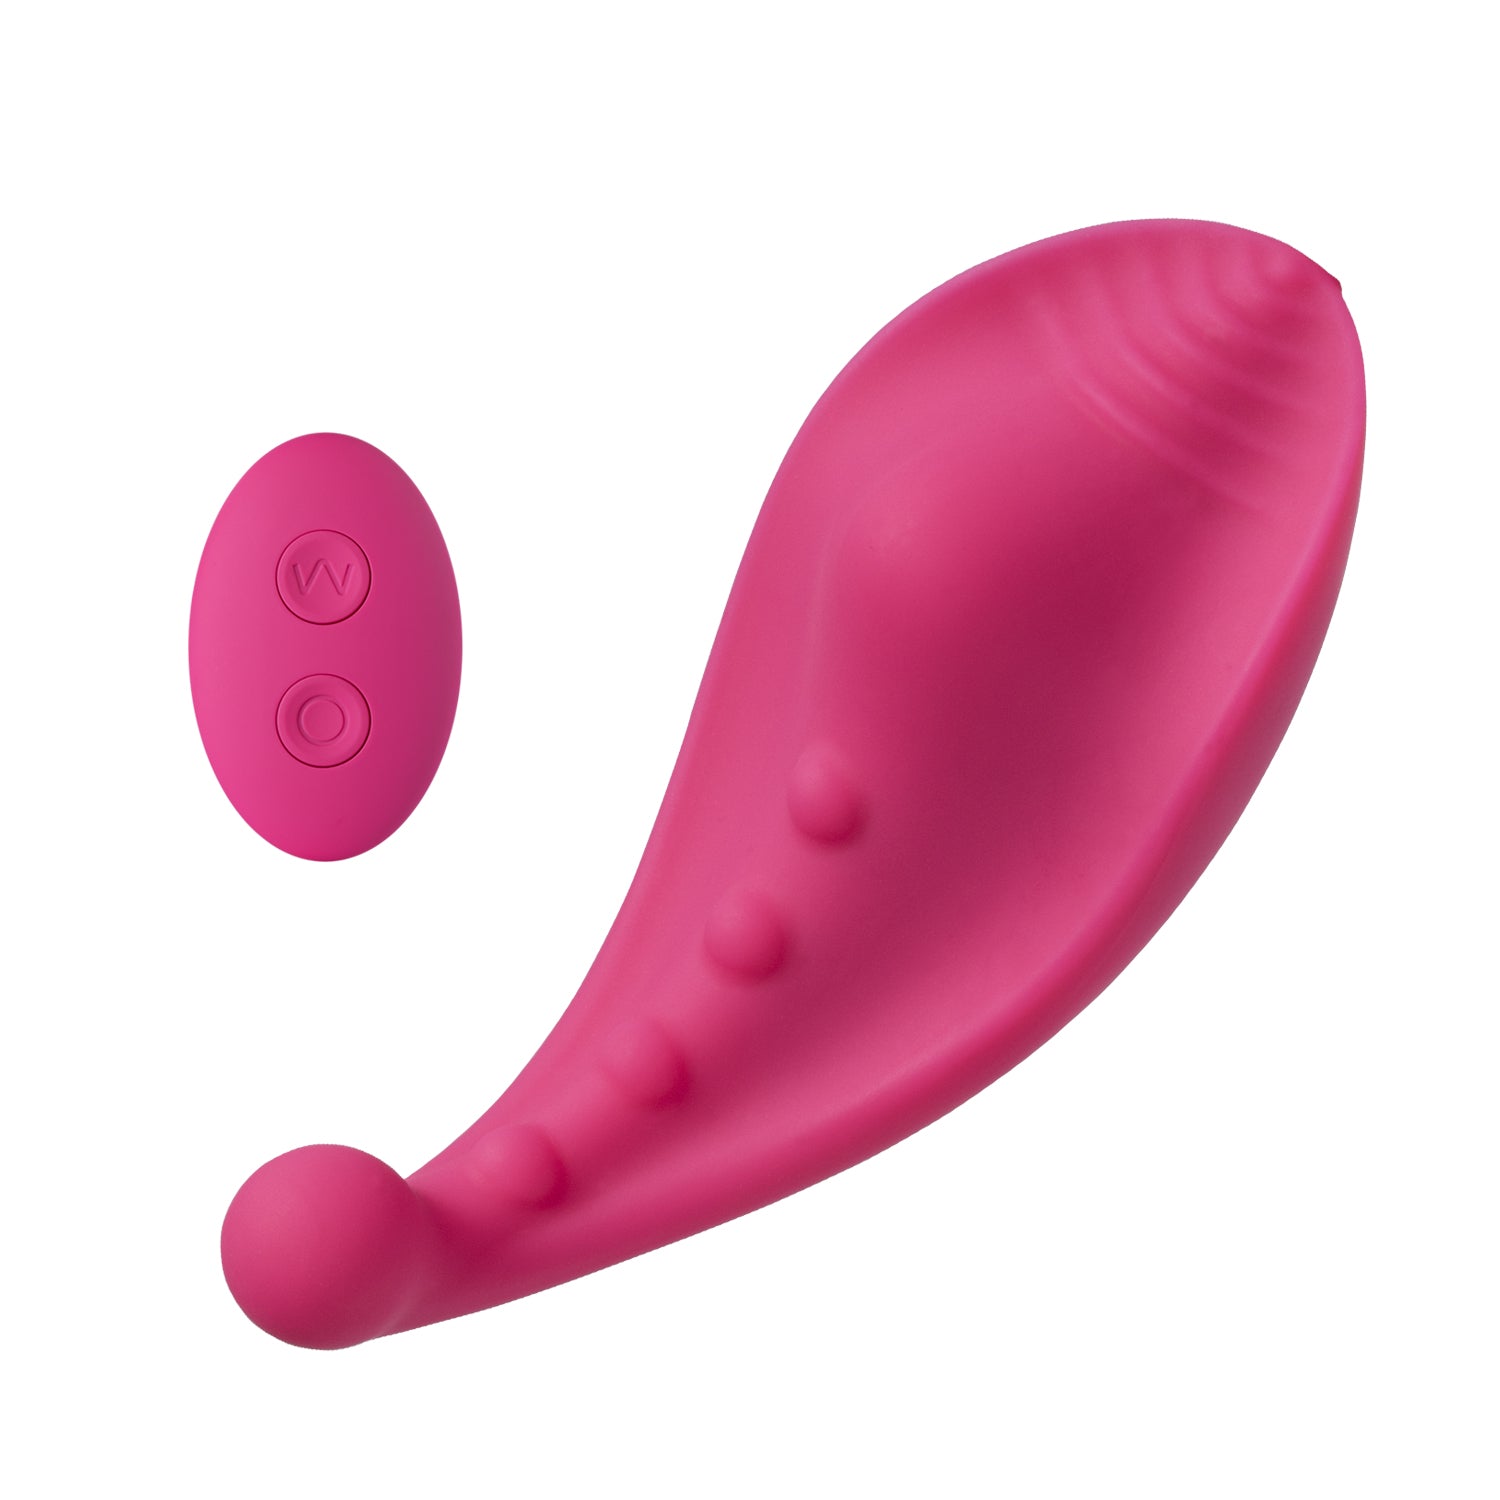 wearable panty vibrator with remote control